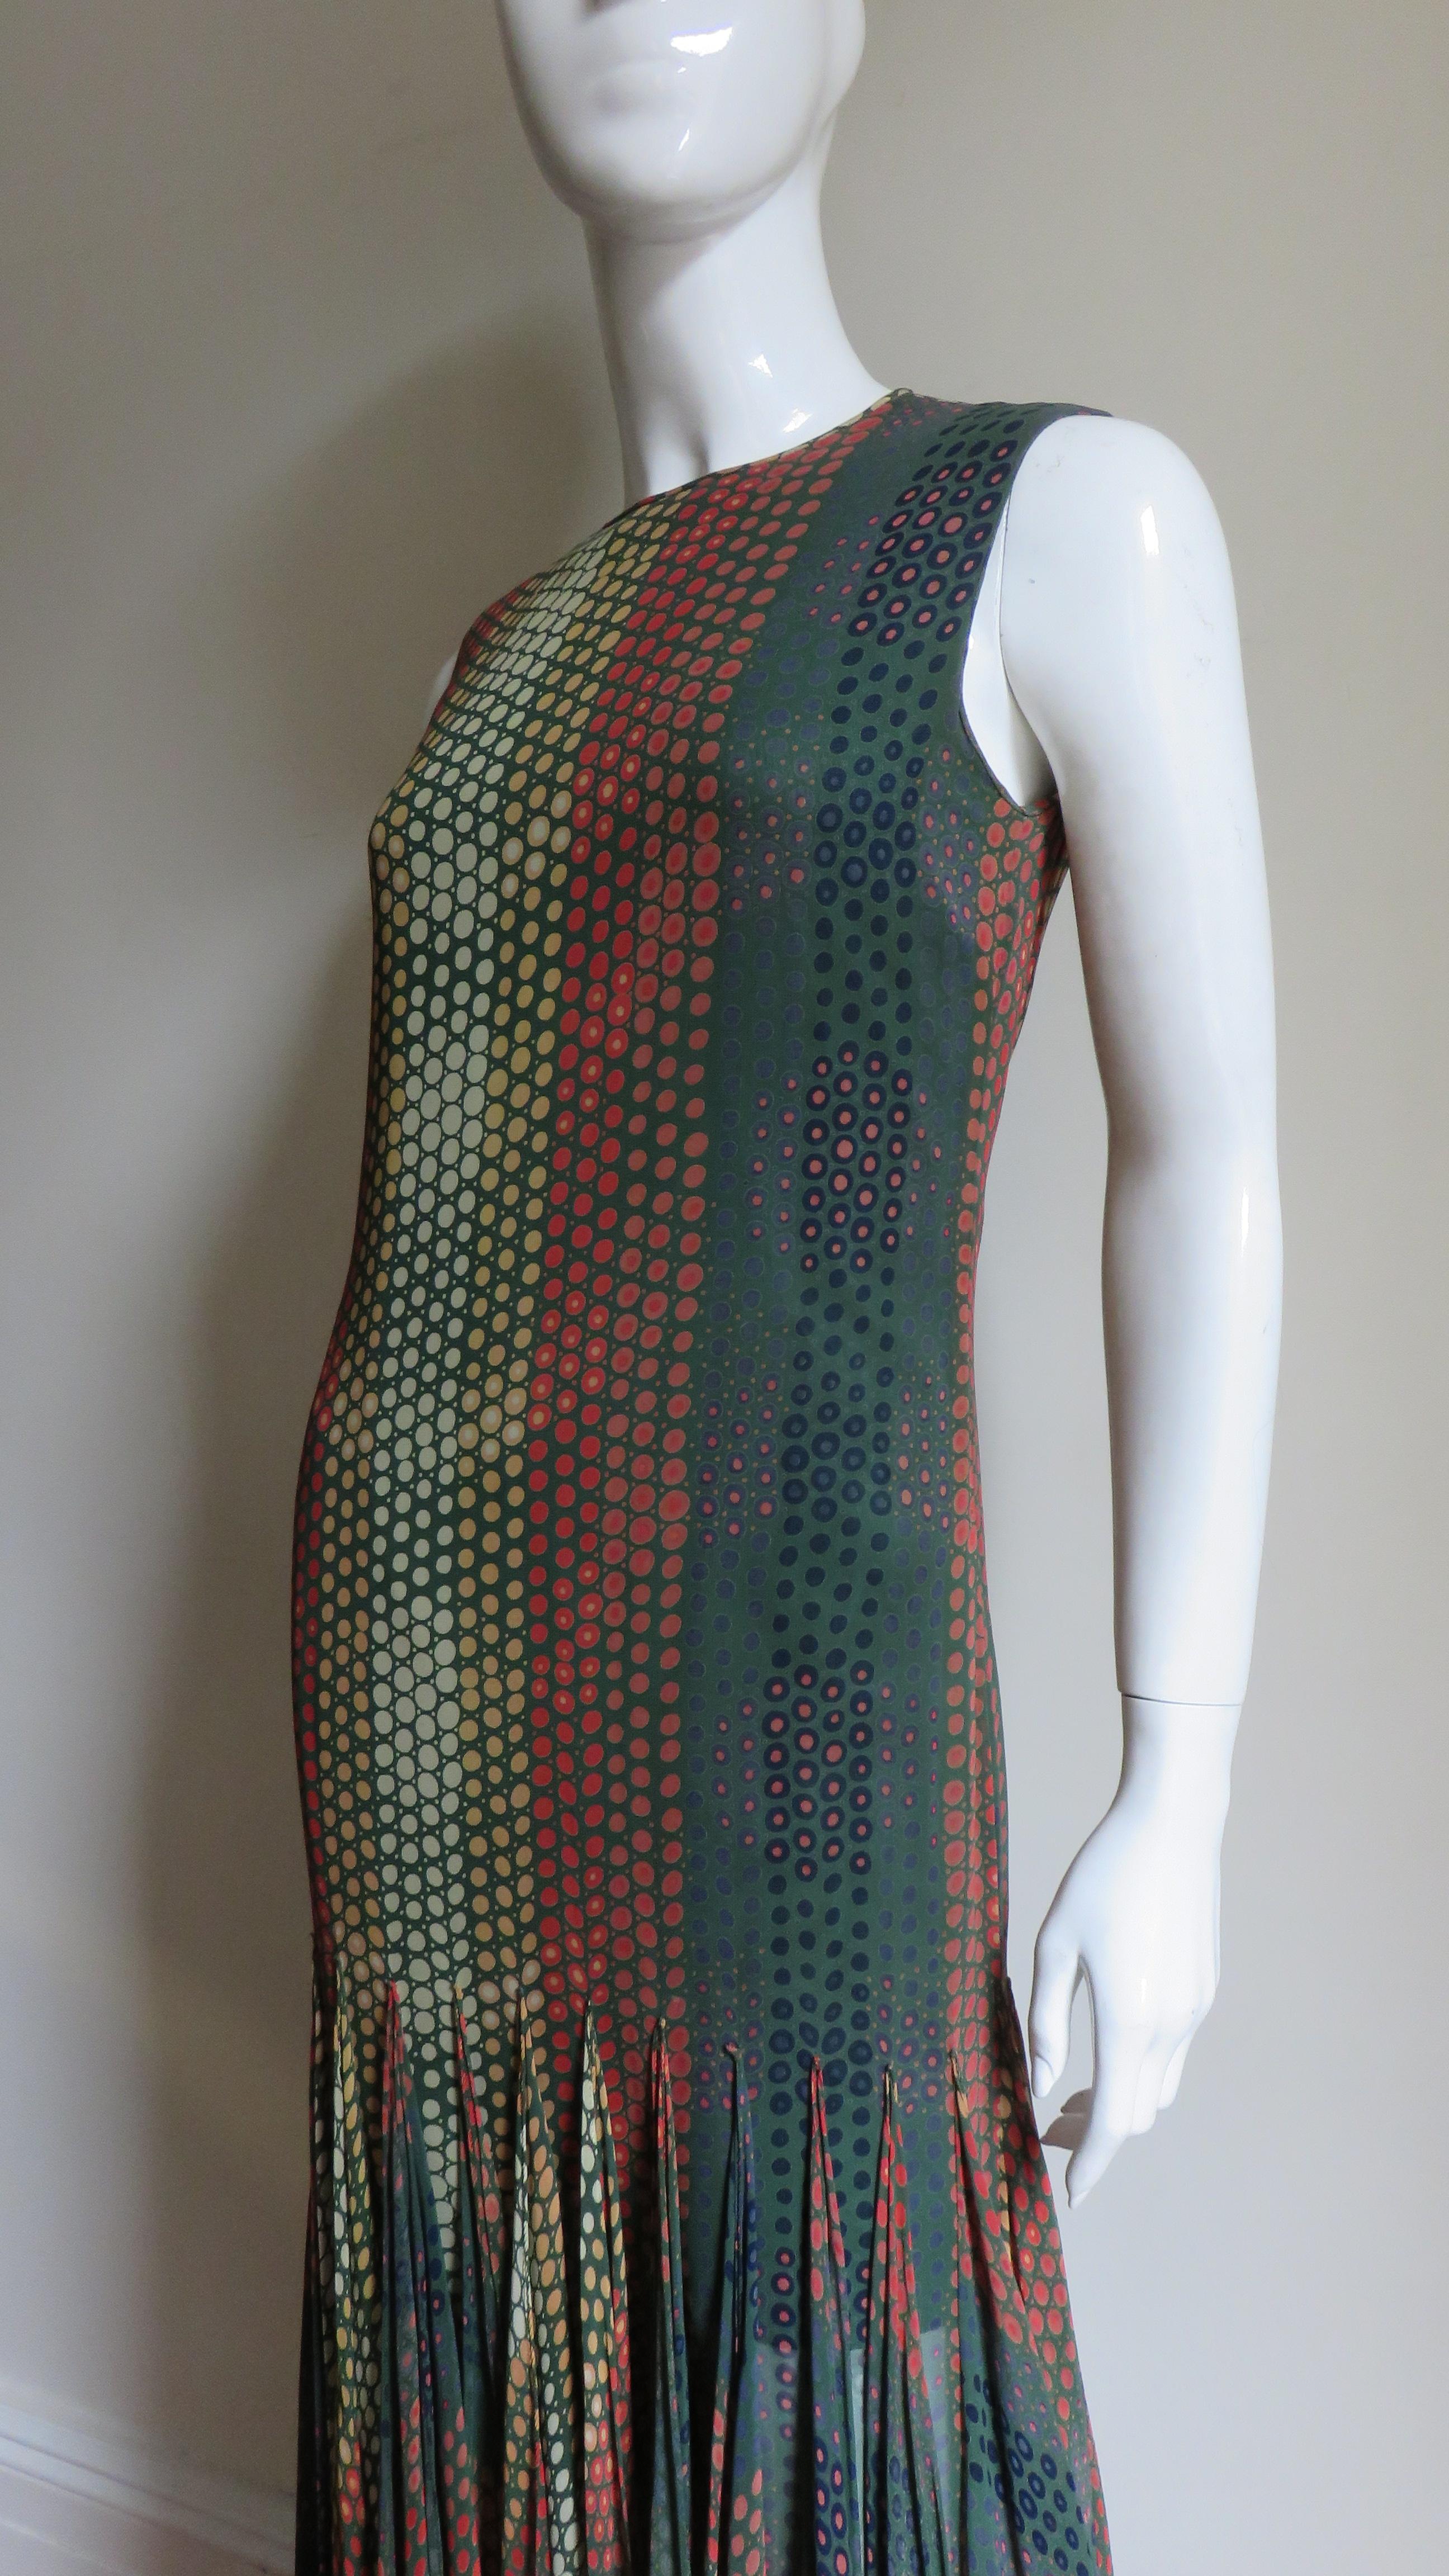  Pierre Cardin 1960s Scarf Hem Dress In Good Condition For Sale In Water Mill, NY